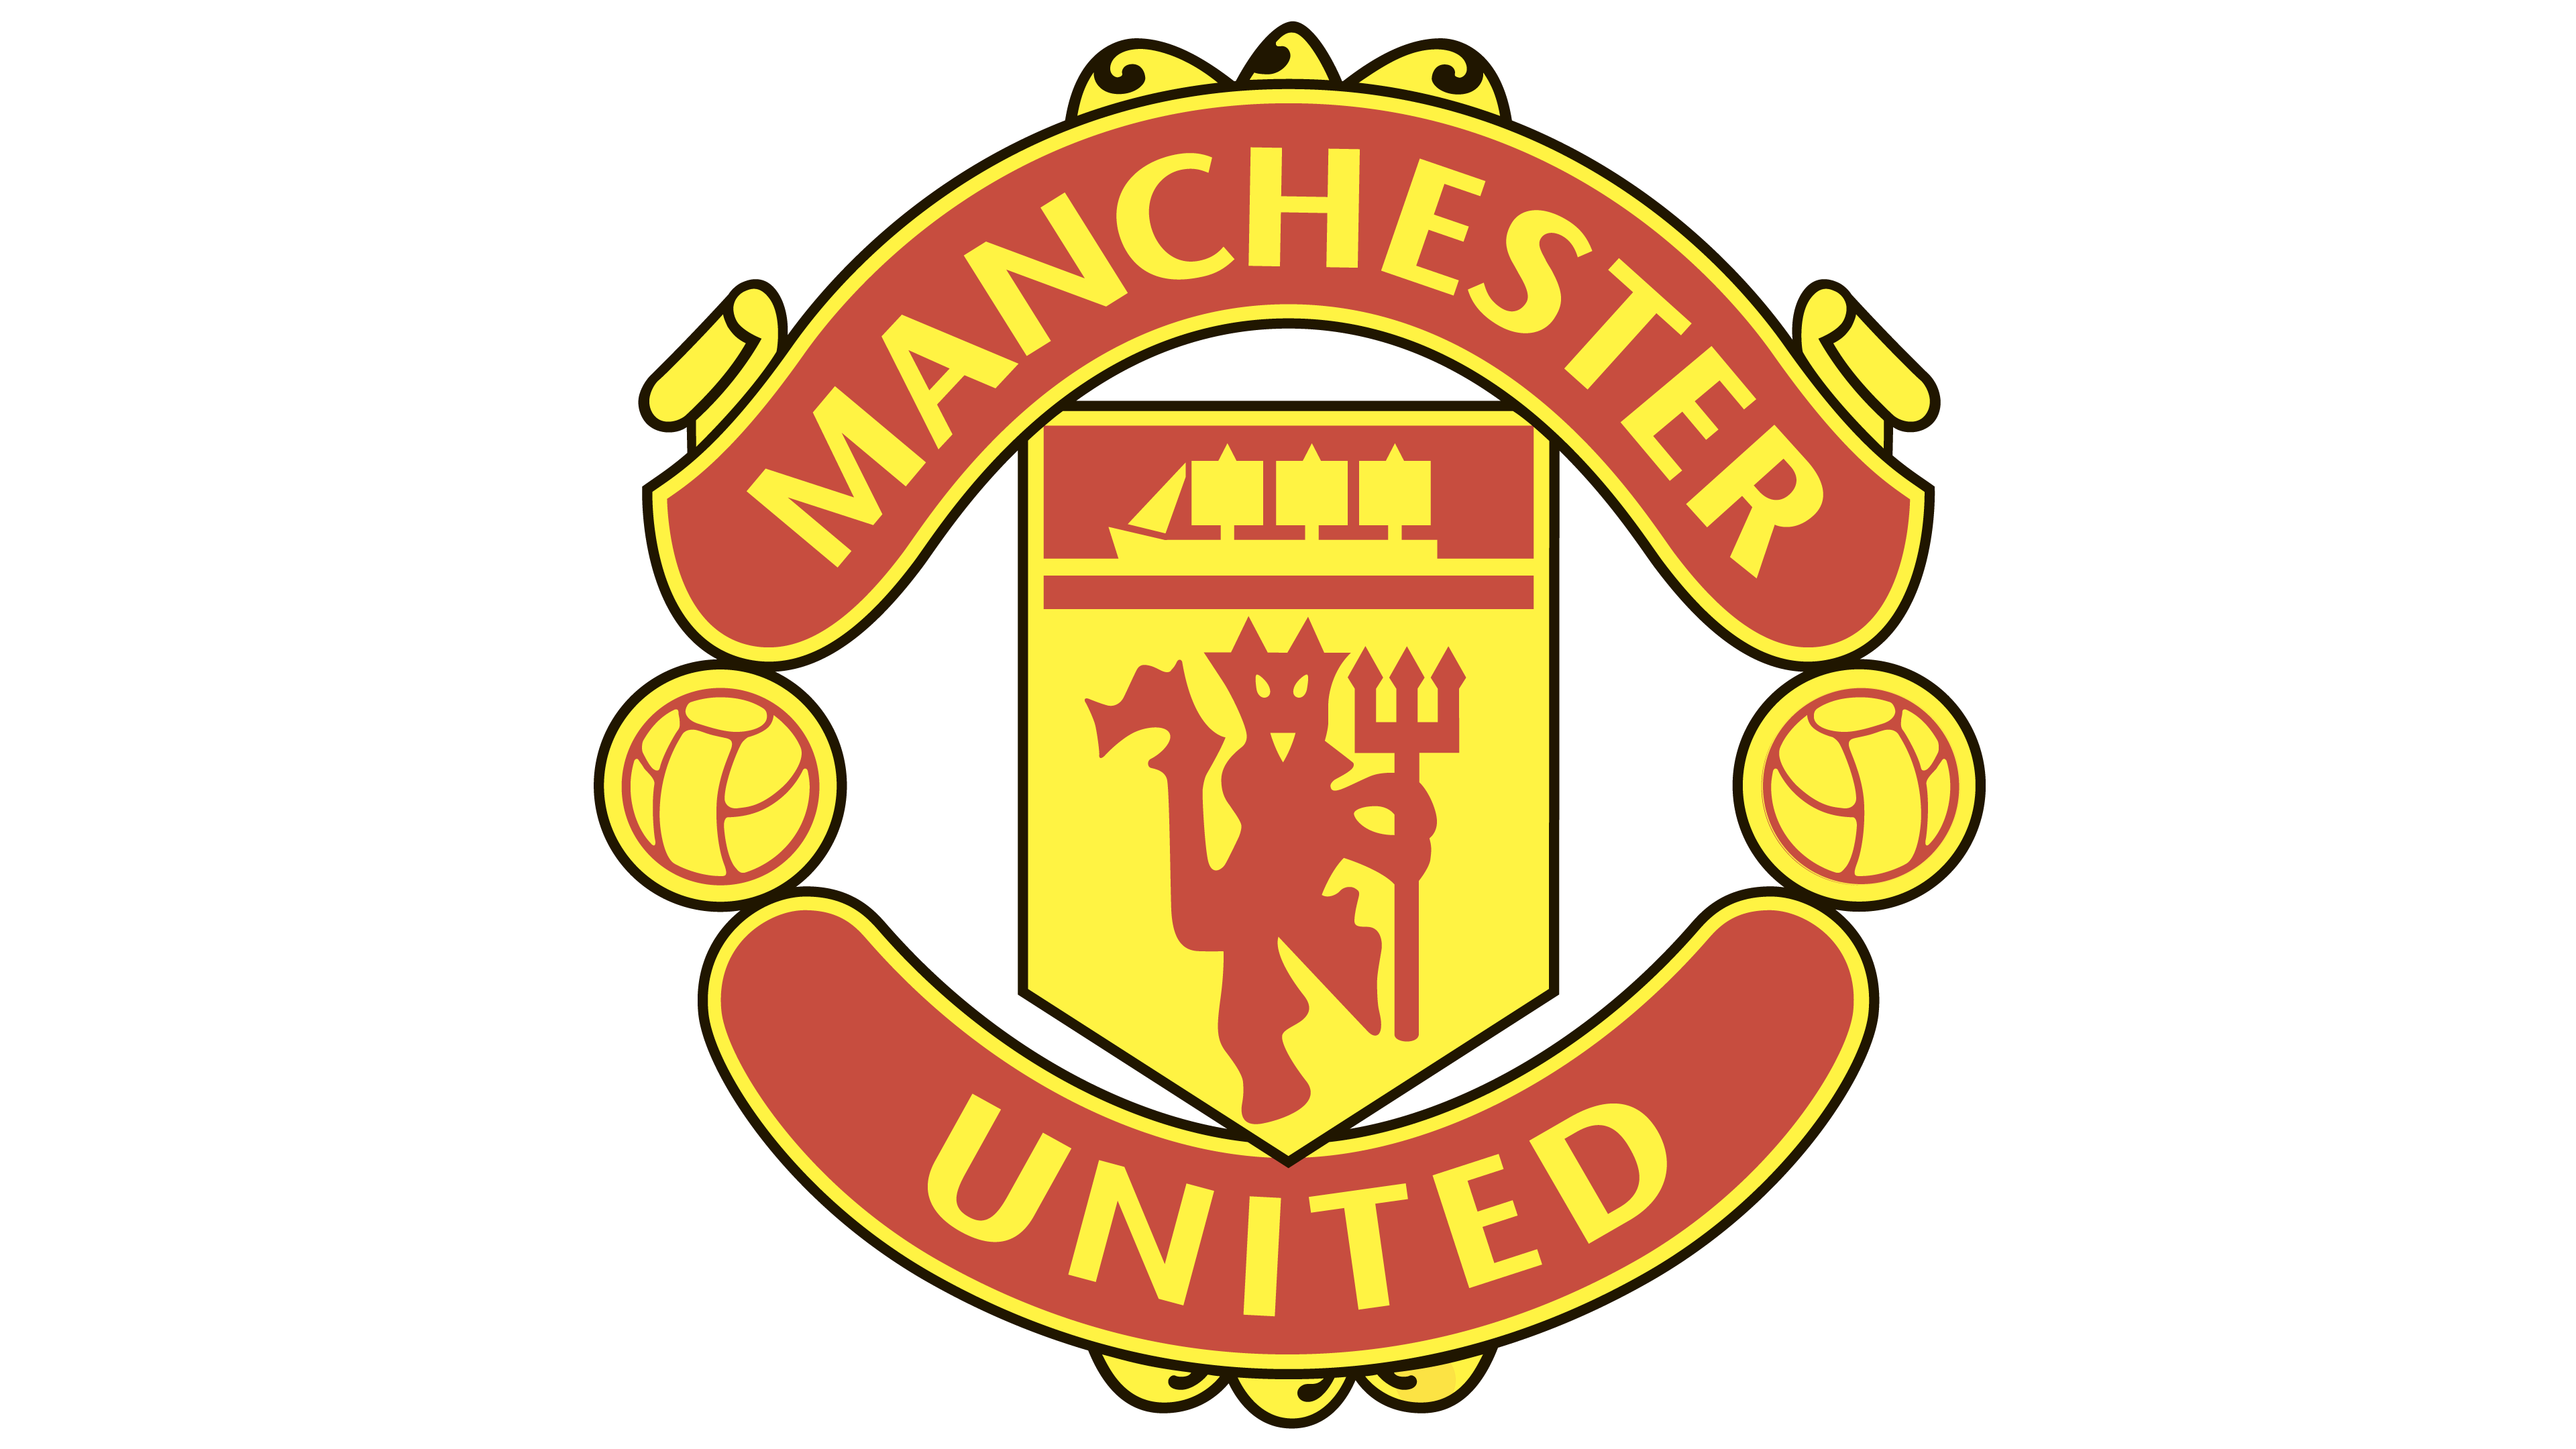 Text On Yellow Red Logo - Manchester United logo - Interesting History Team Name and emblem